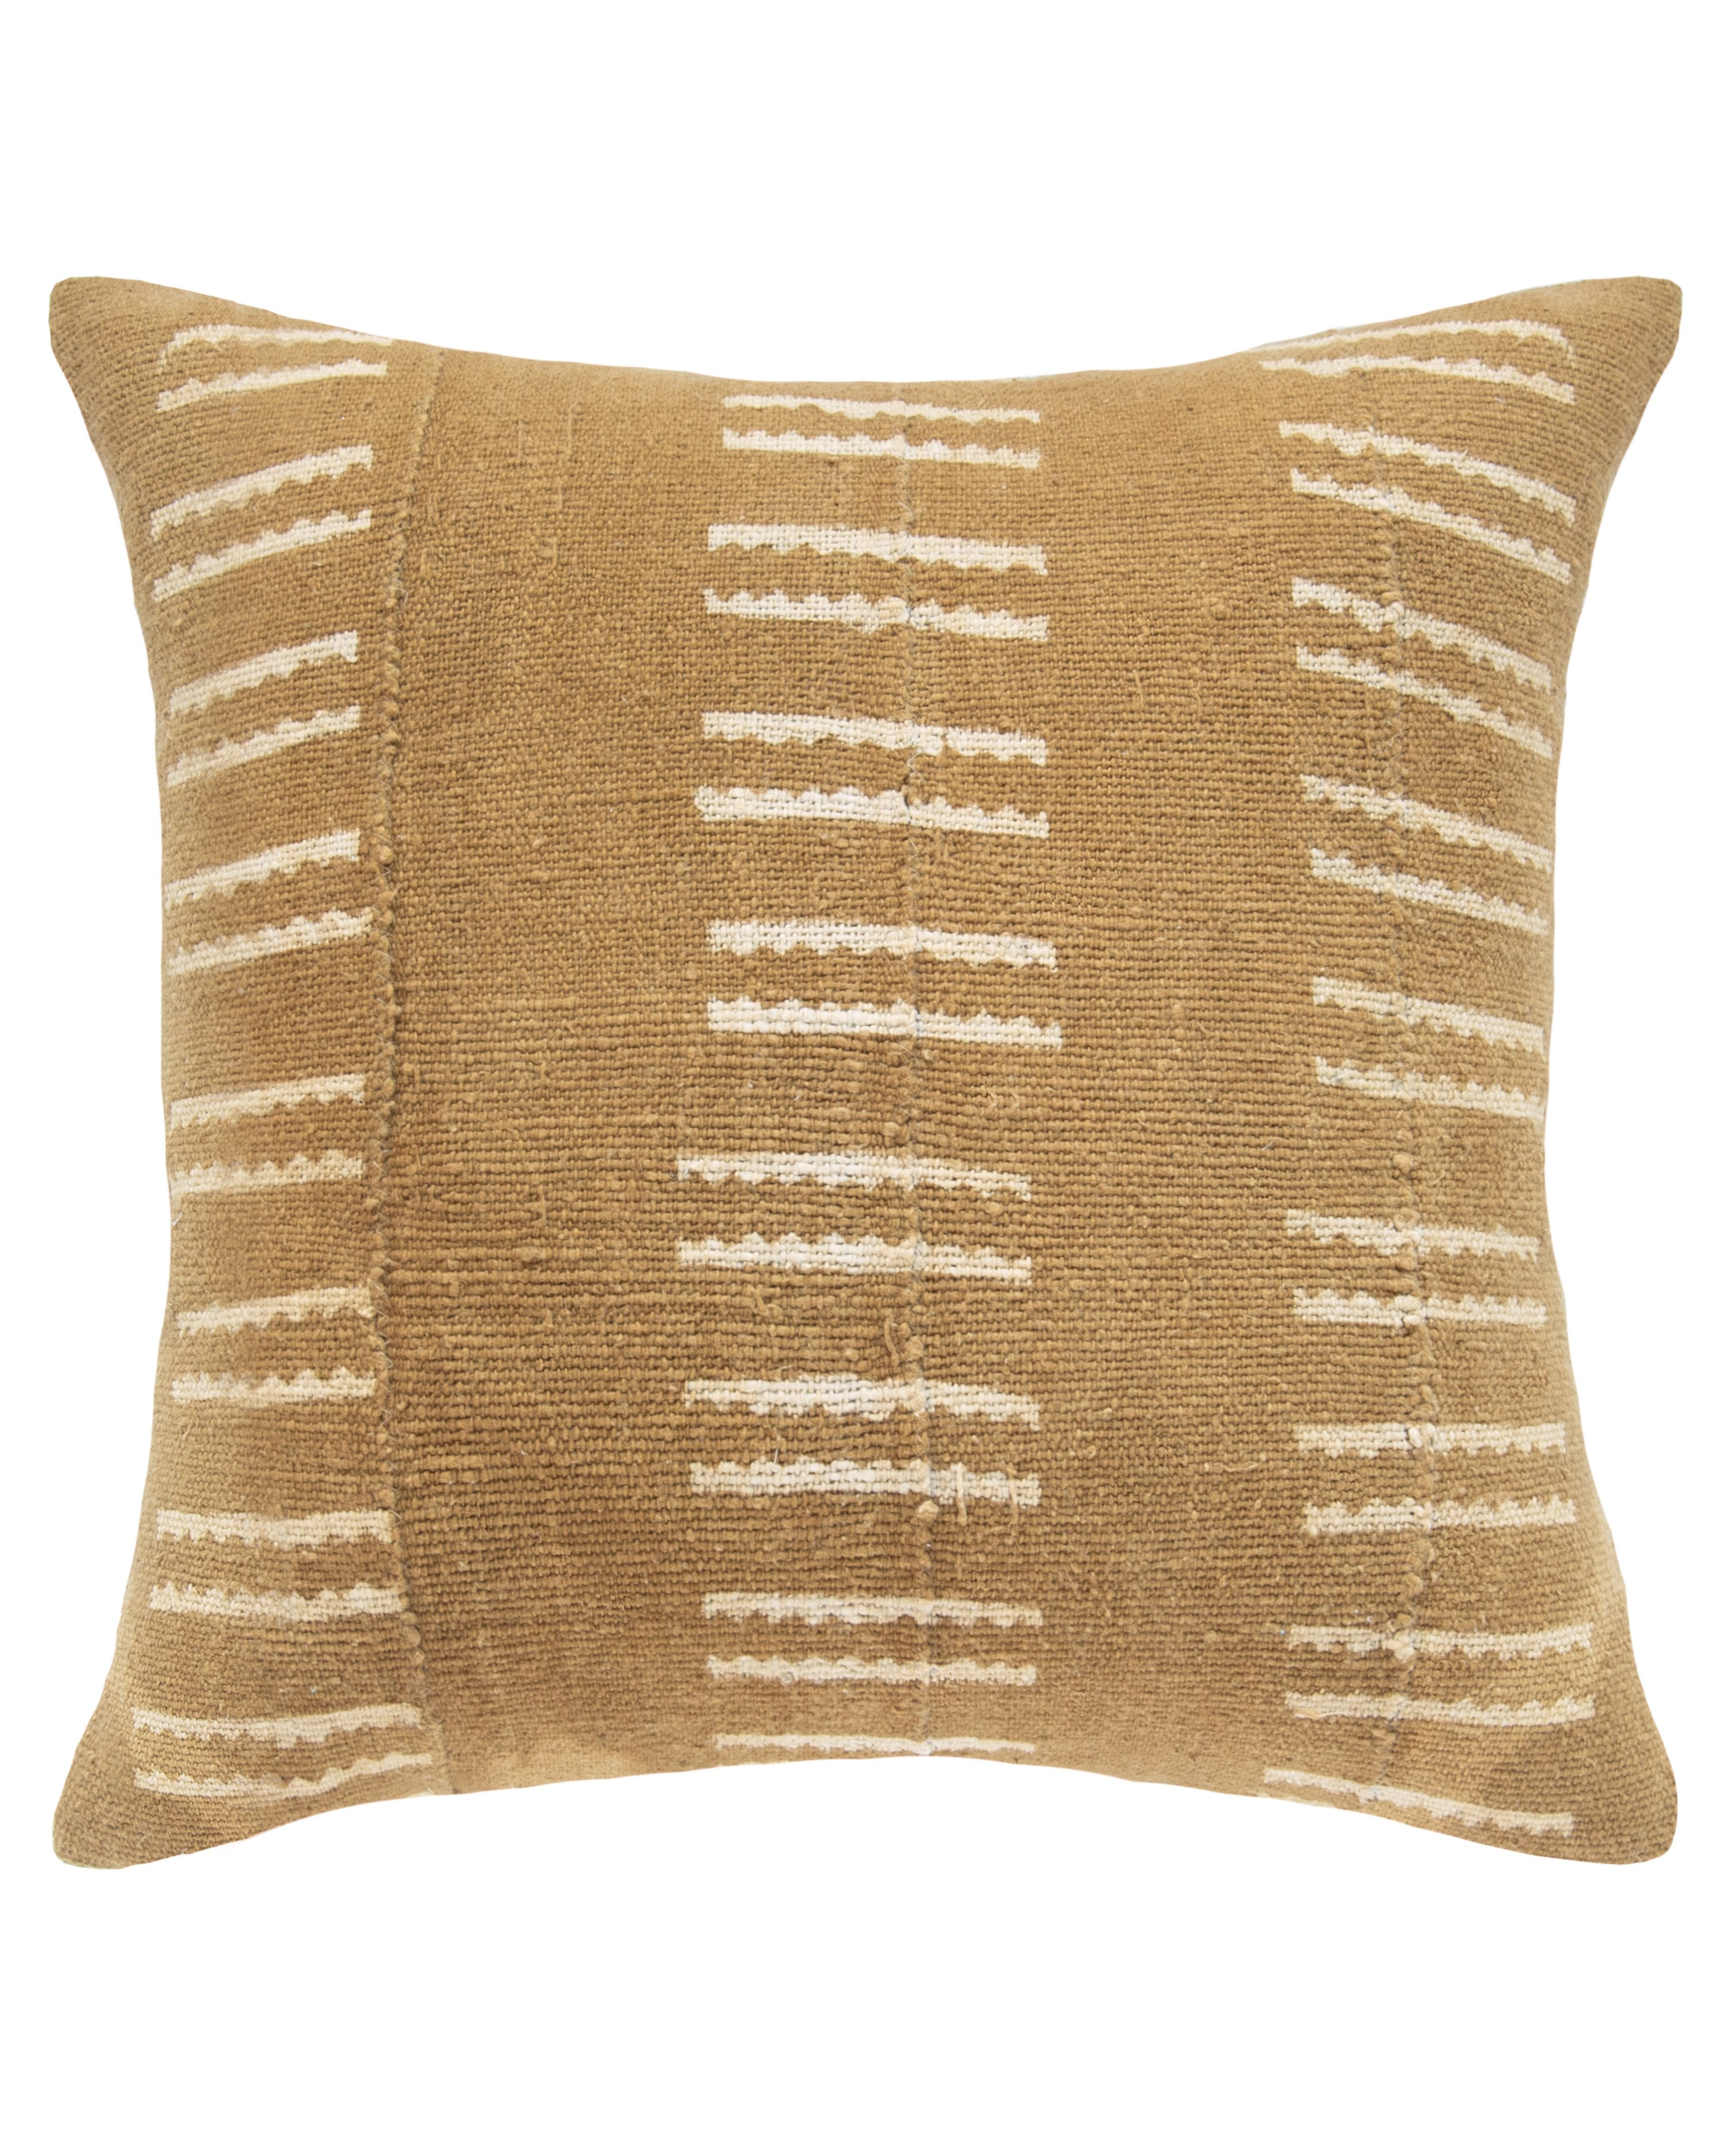 snake bone mud cloth pillow in tan - cover only - PillowPia